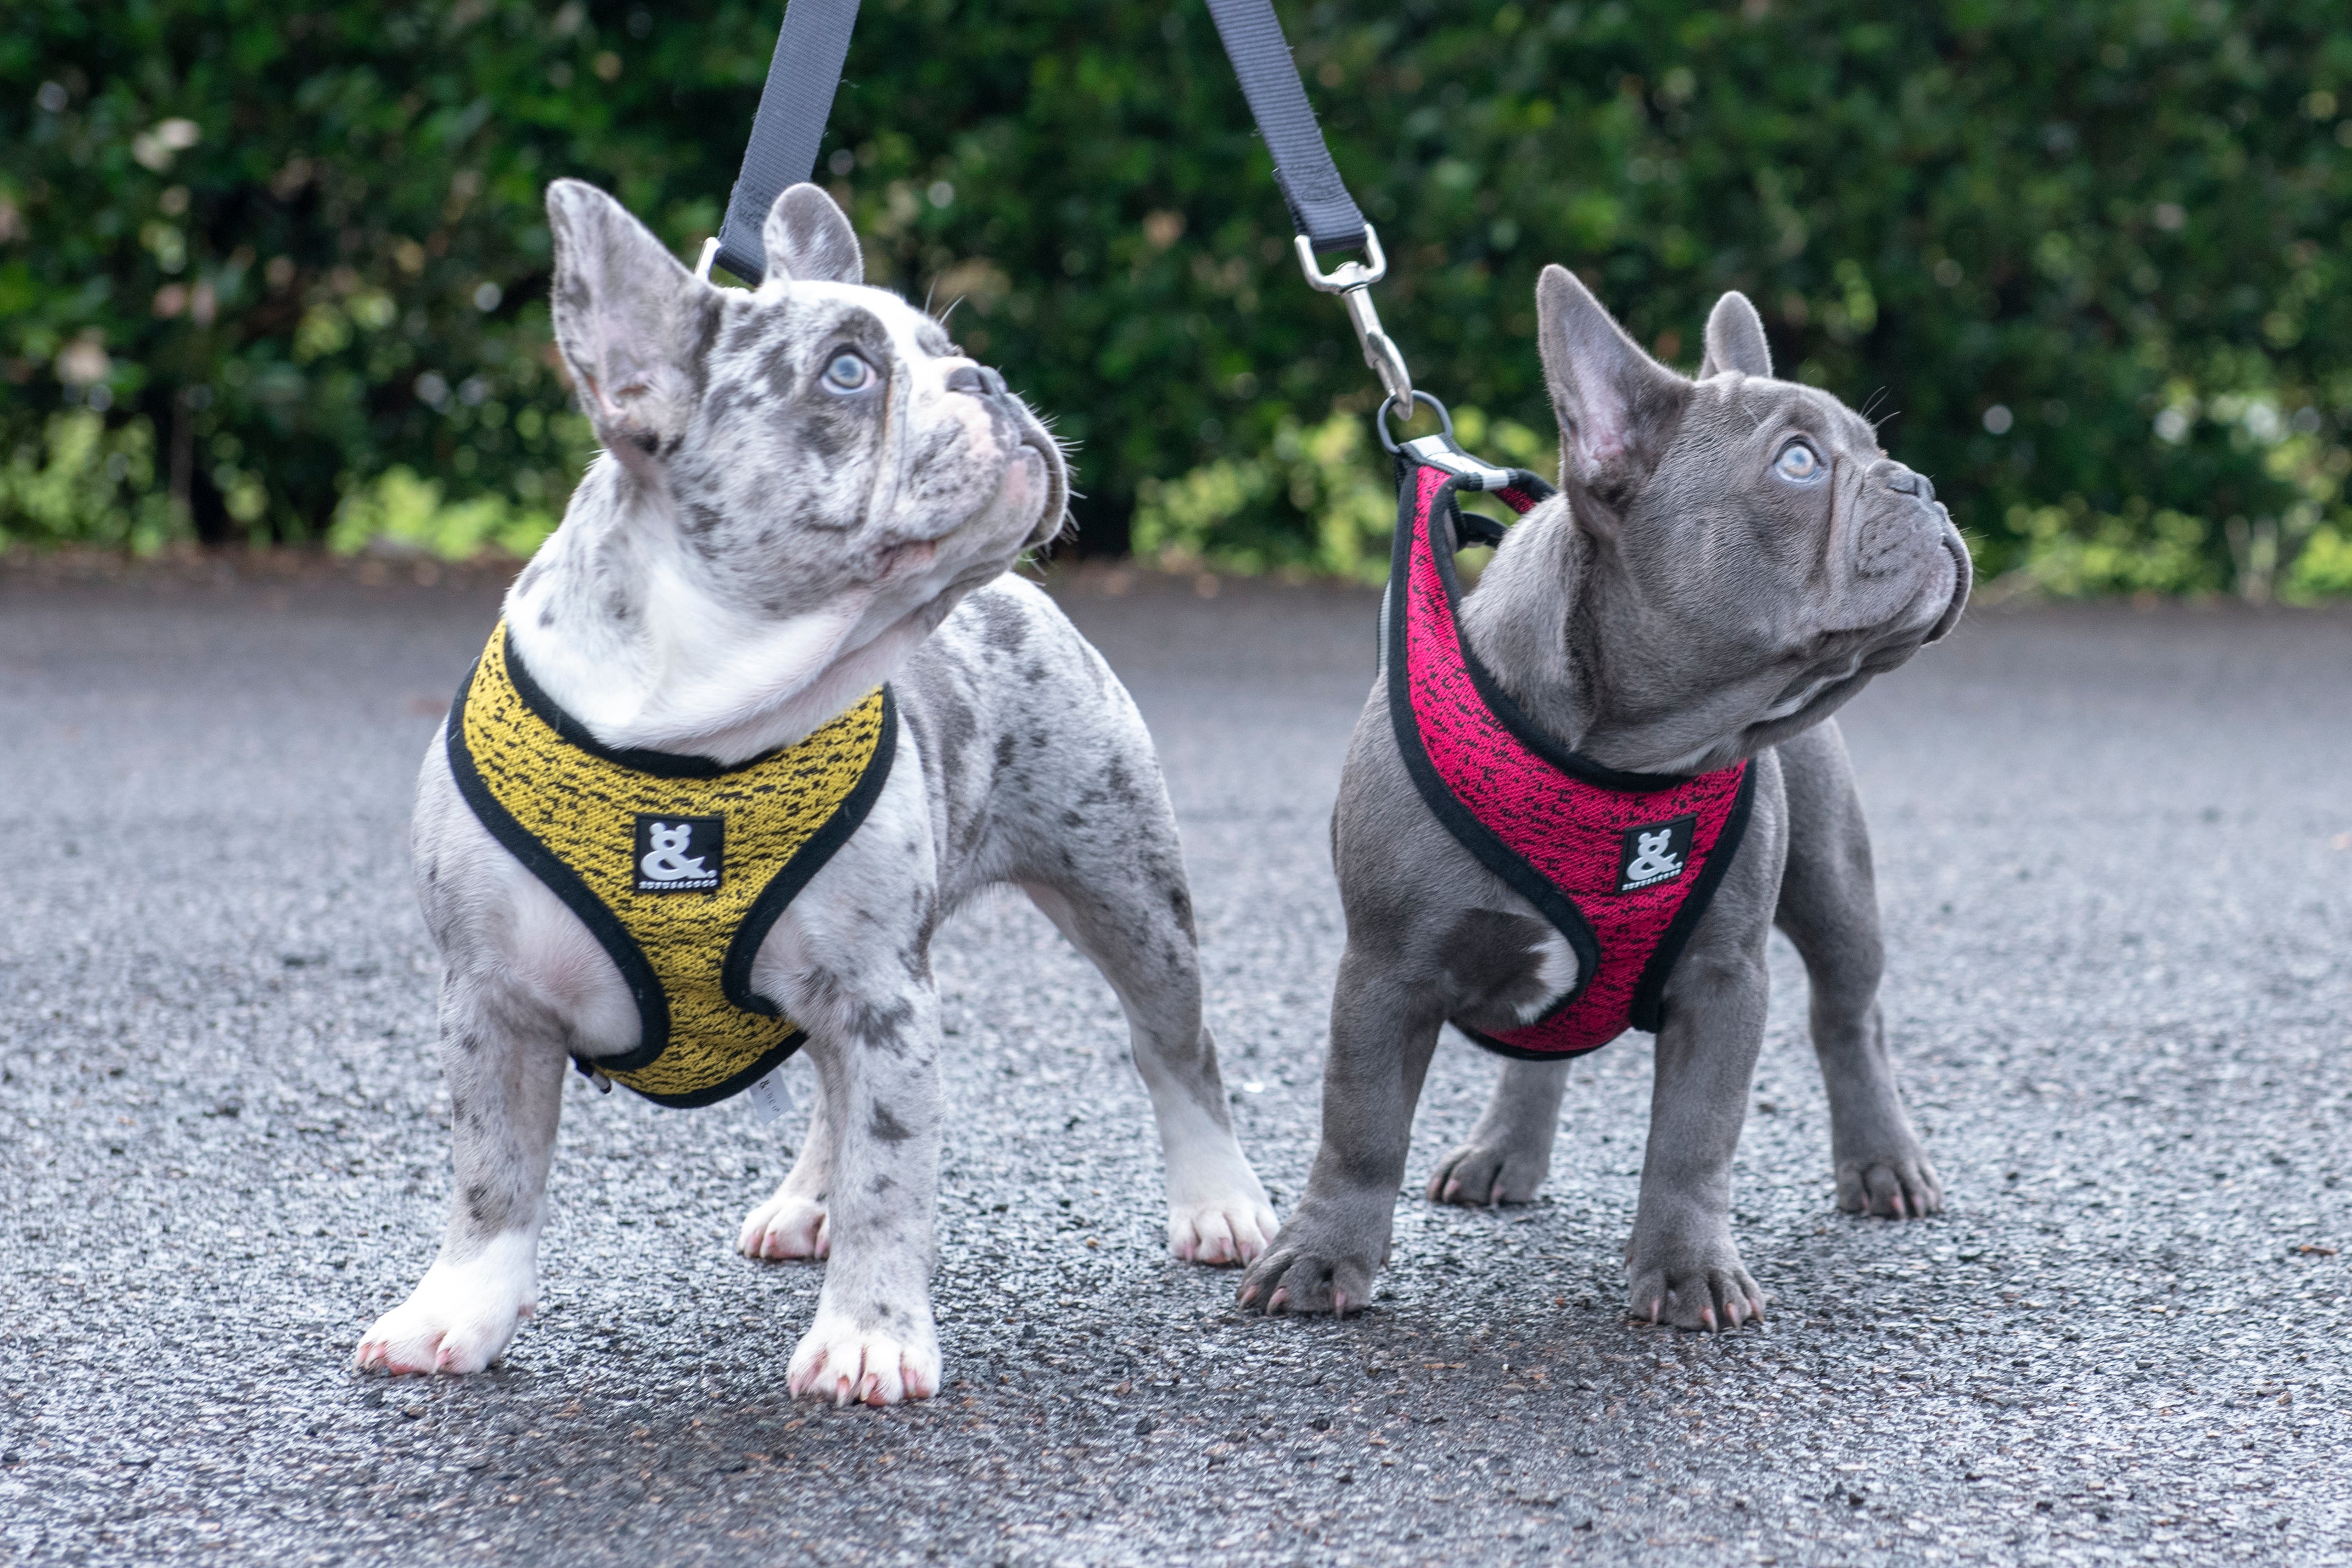 Dog harness vs collar: Which is better for your pup?